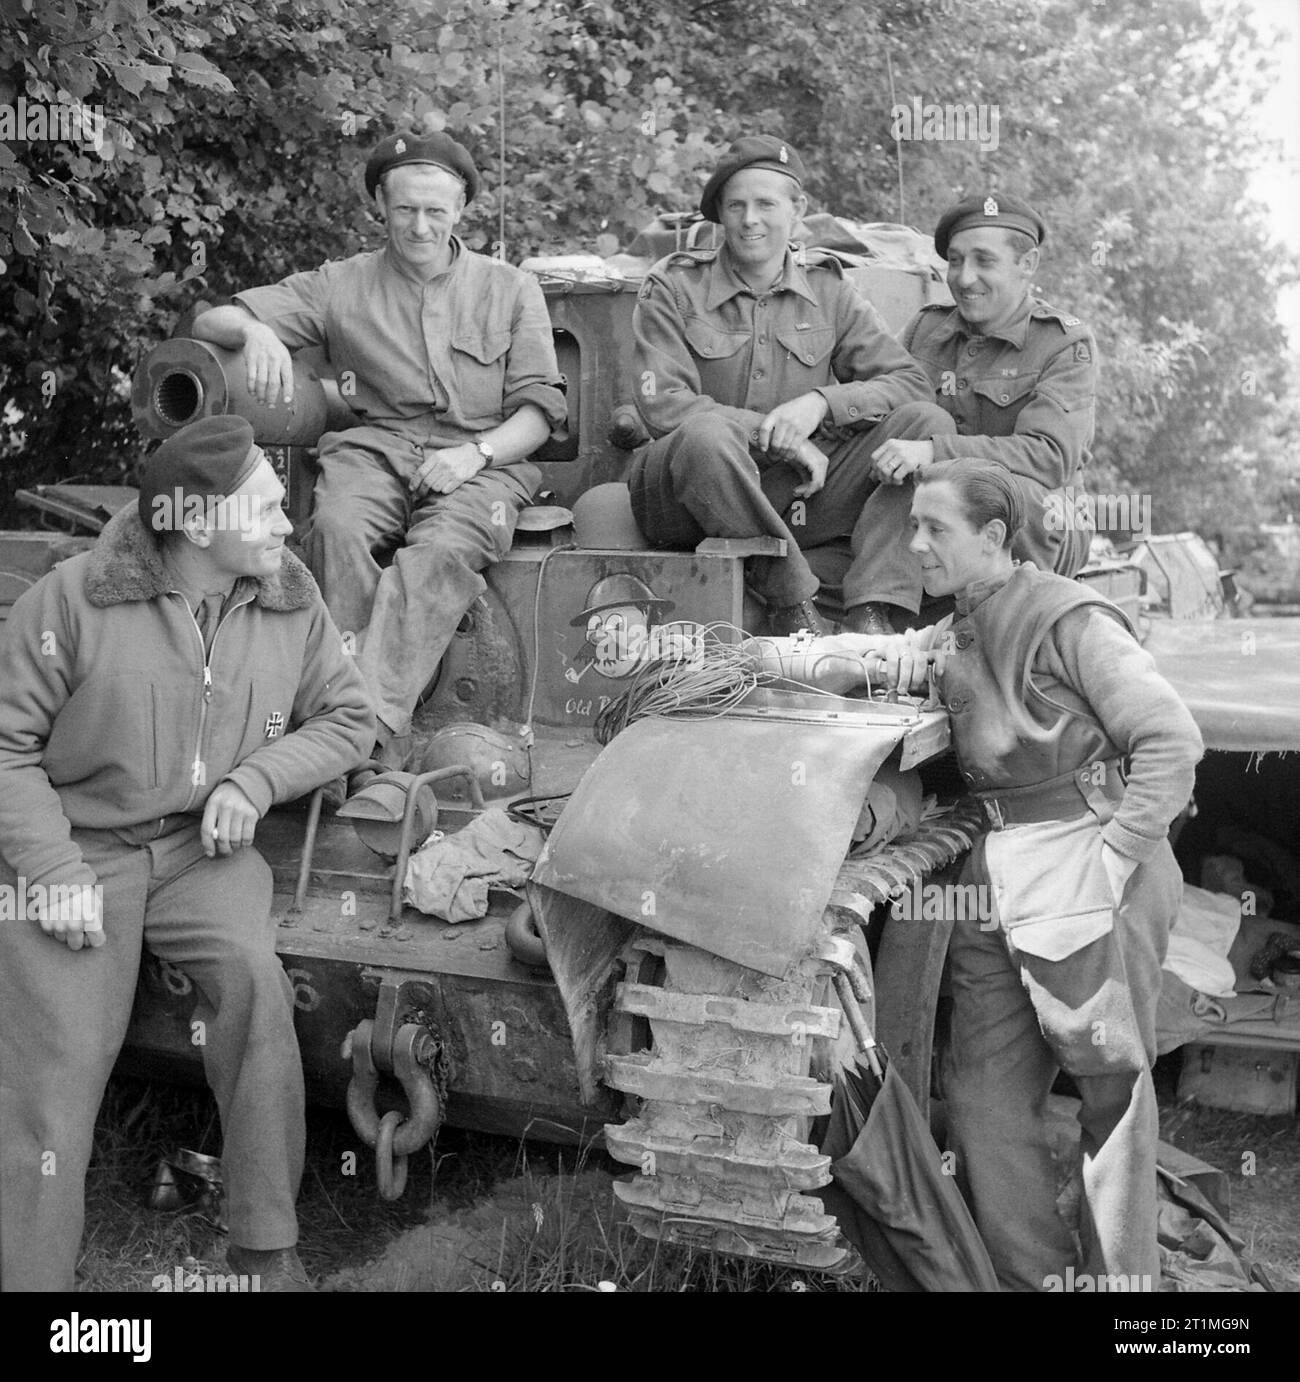 Captain L Cotton MM with his Cromwell Mk VI tank and crew of 4th County of London Yeomanry, 7th Armoured Division, Normandy, 17 June 1944. Captain L Cotton MM (left, wearing a 'liberated' German Iron Cross!) with his Cromwell VI tank, 'Old Bill', and crew of 4th County of London Yeomanry, 7th Armoured Division, 17 June 1944. Cotton had been promoted to captain following the regiment's action at Villers Bocage. Stock Photo